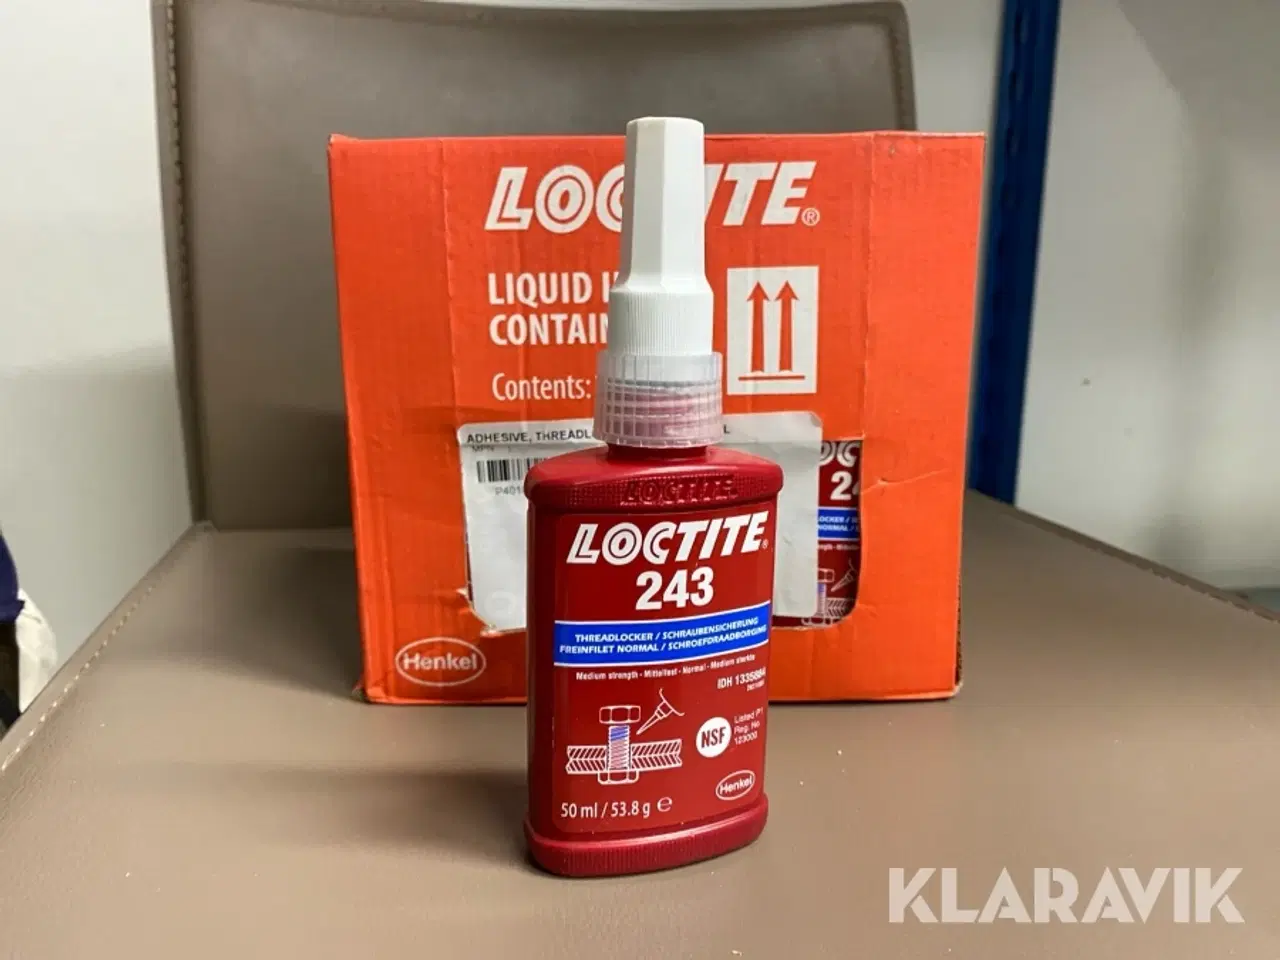 Billede 1 - Boltsikring LOCTITE 243 12x50 ml